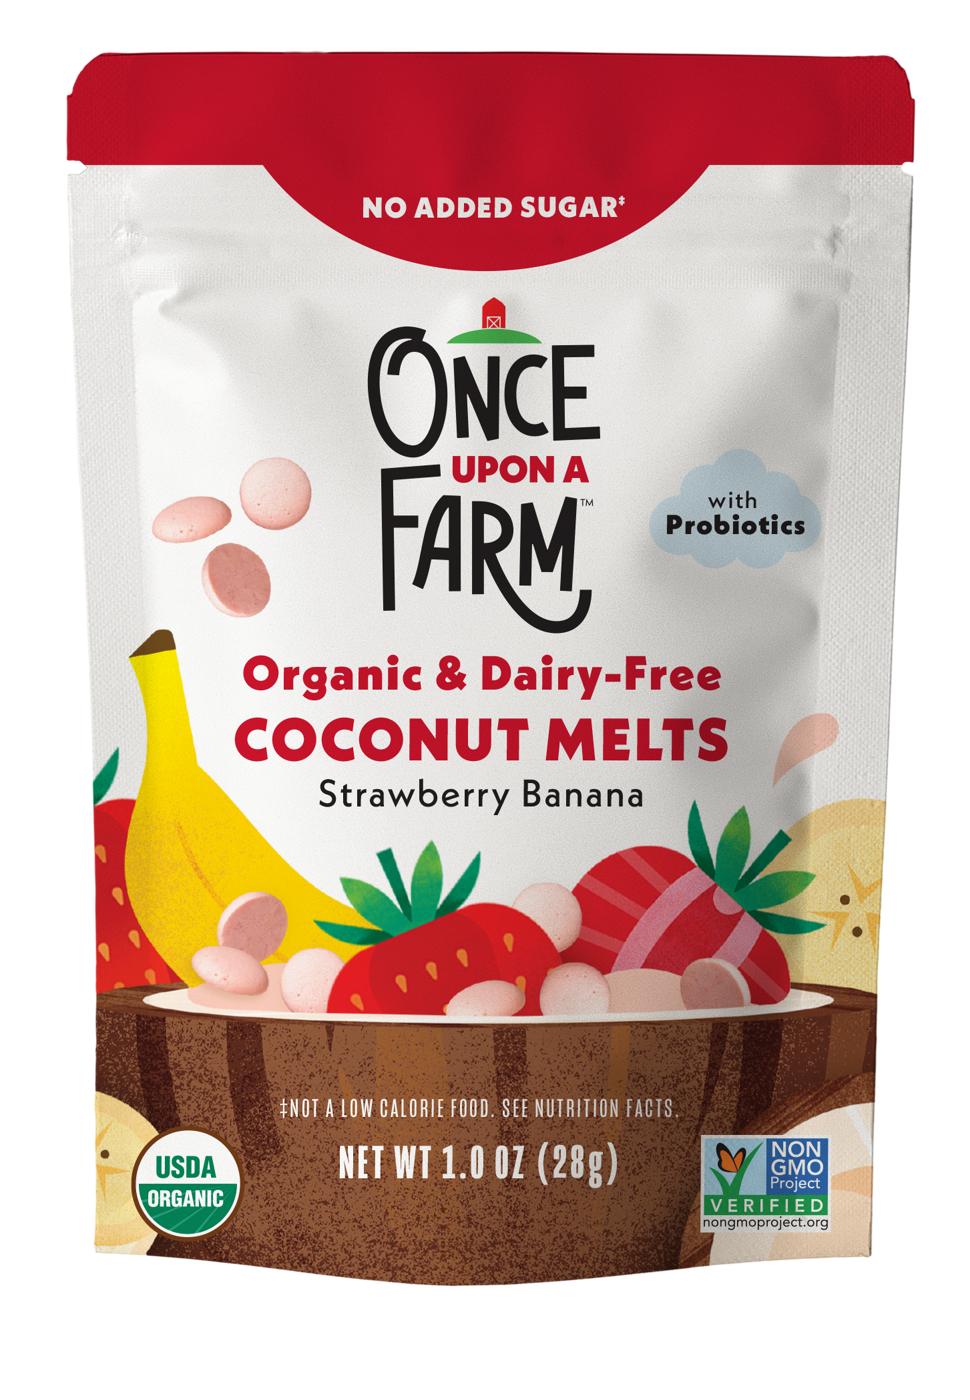 Once Upon a Farm Organic & Dairy-Free Coconut Melts - Strawberry Banana; image 1 of 2